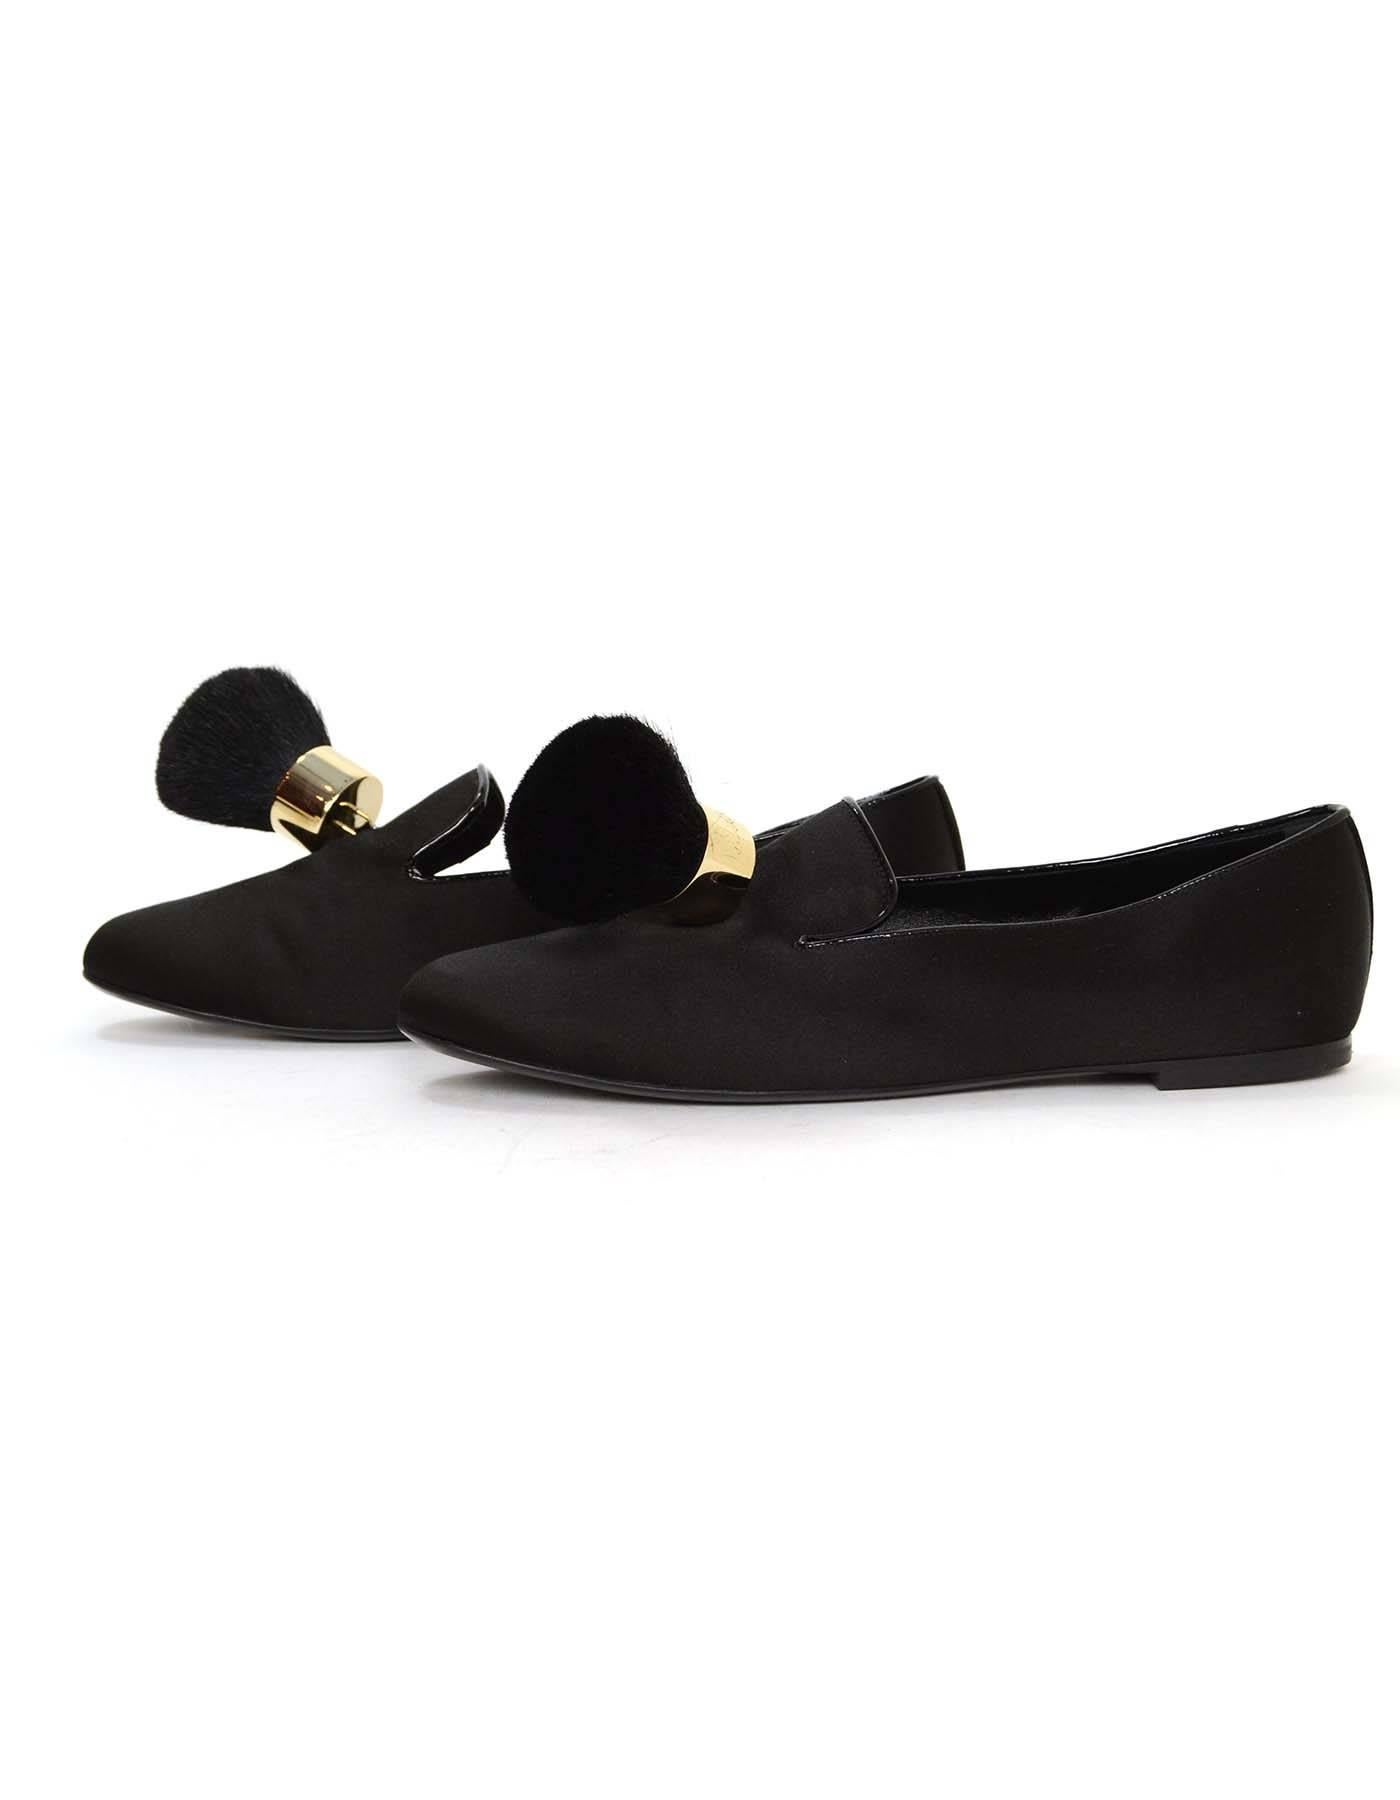 Roger Vivier Black Satin Pinceau Slippers 
Features large tassel at top
Made In: Italy
Color: Black
Materials: Satin
Sole Stamp: RV Made in Italy Women's Size 37 1/2
Retail Price: $1,275 + tax
Overall Condition: Excellent pre-owned condition